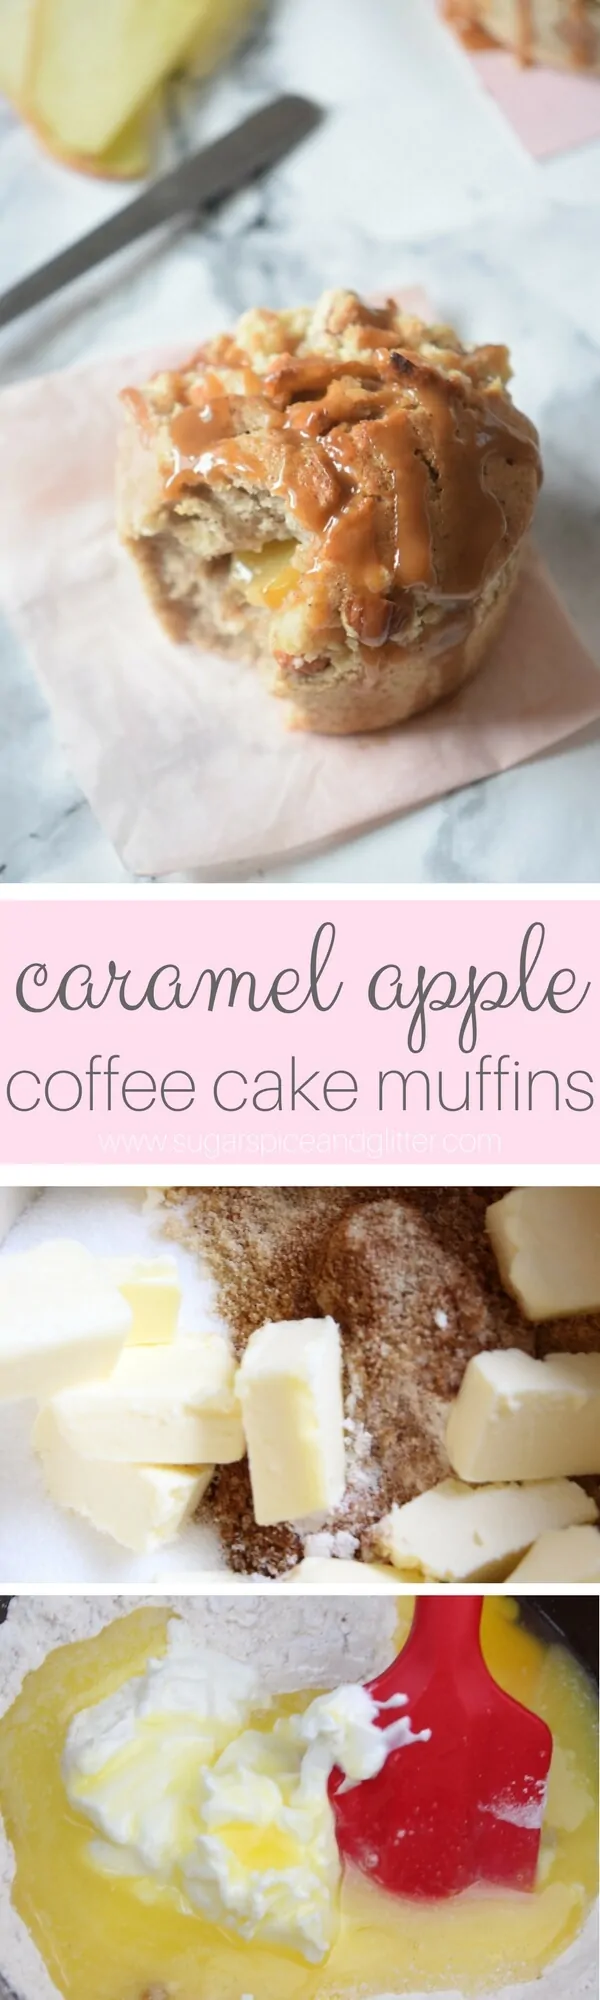 Apple Coffee Cake Muffins with a crumb topping, fresh apples and salted caramel sauce - this is one decadent fall dessert!